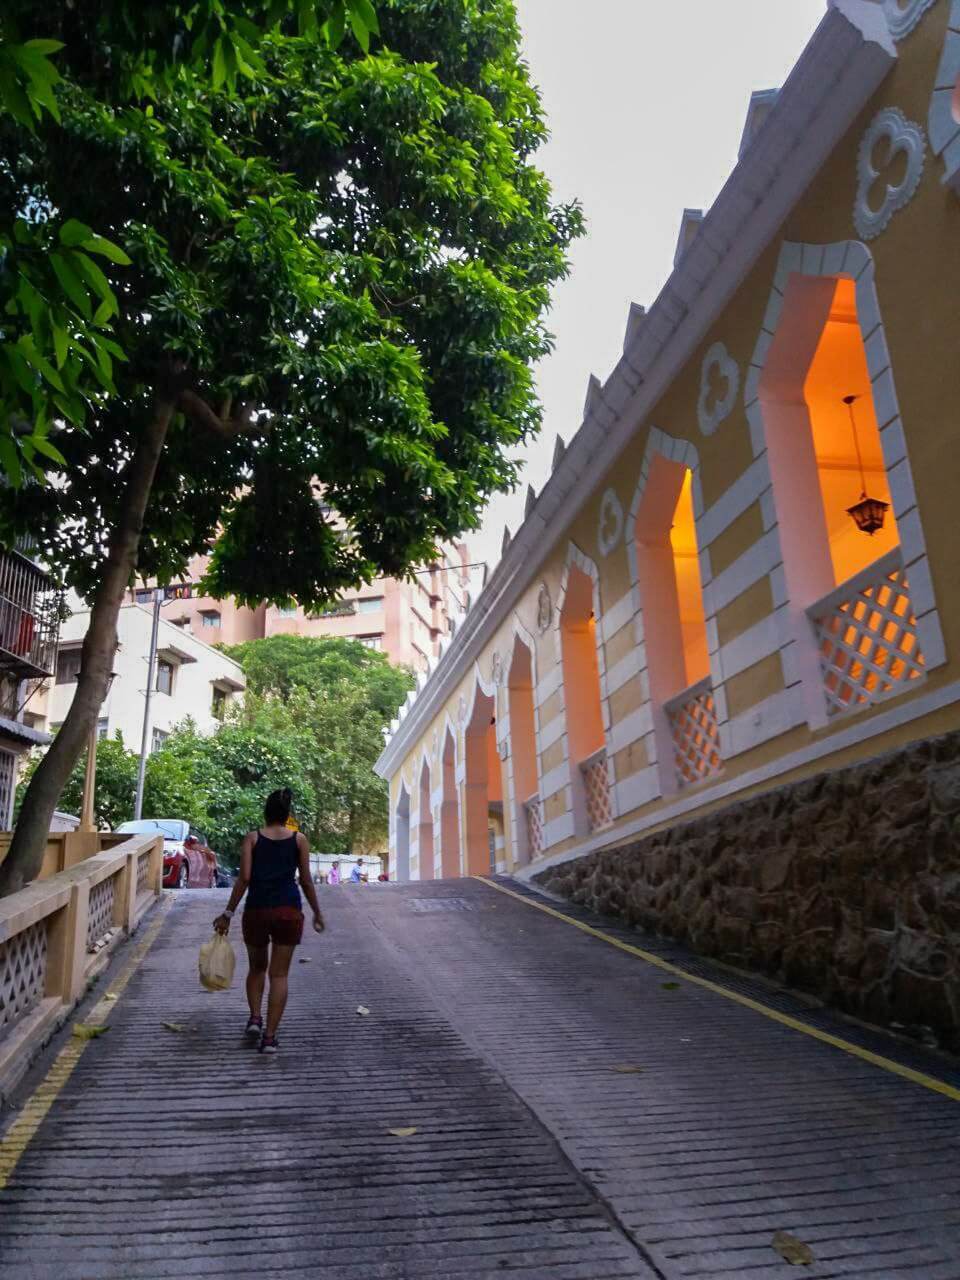 Moorish Barracks is one of the top Macau tourist spots to visit for free